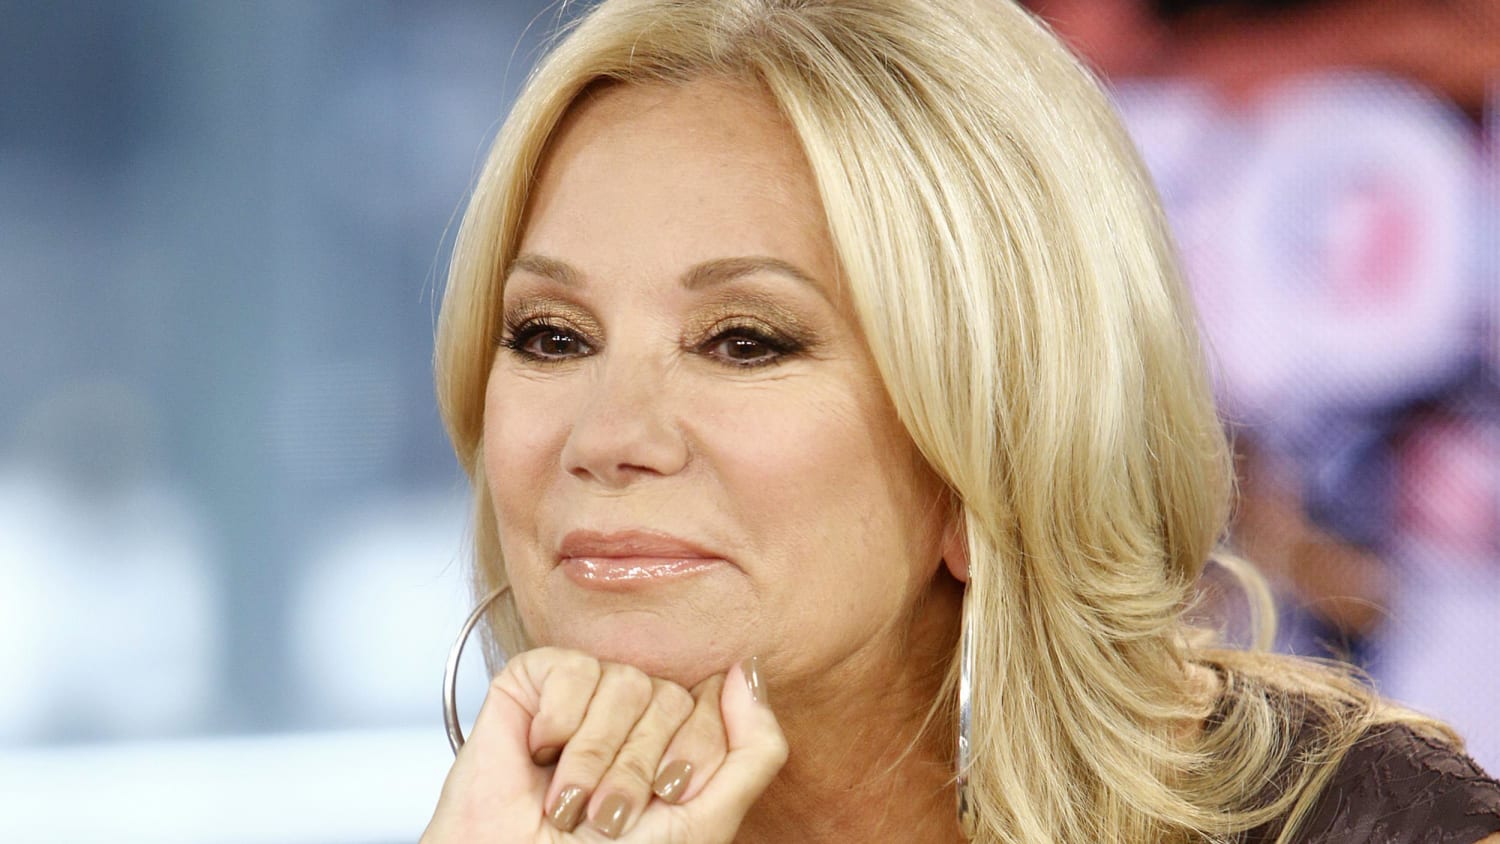 Kathie Lee Gifford to be inducted into Broadcasting Hall of Fame